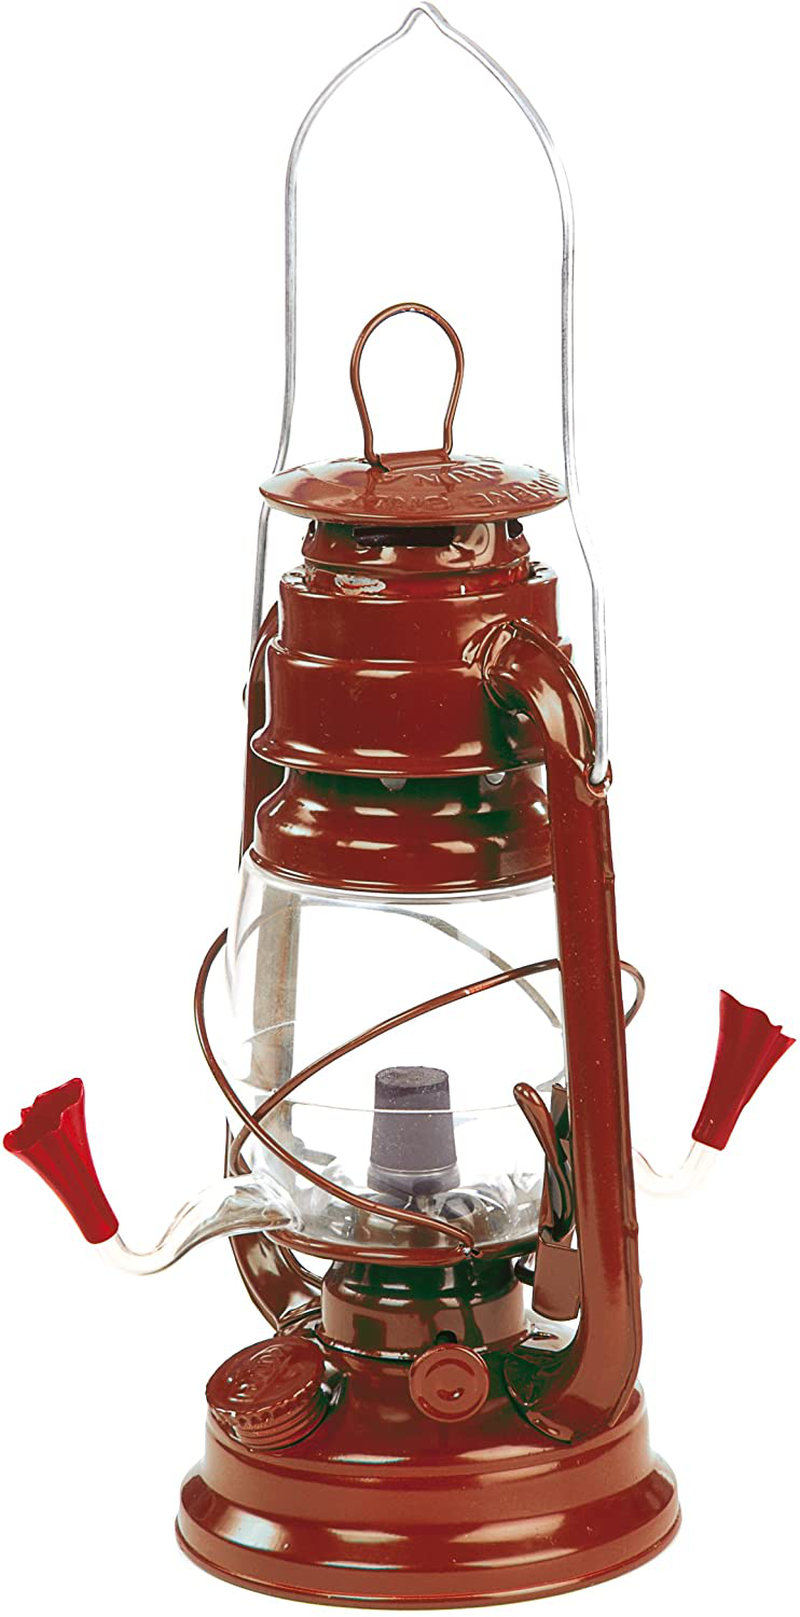 GSI Outdoors Outside Inside Hurricane Lantern Hummingbird Feeder for Outdoors and Rustic Yard Decor Red, 7.5